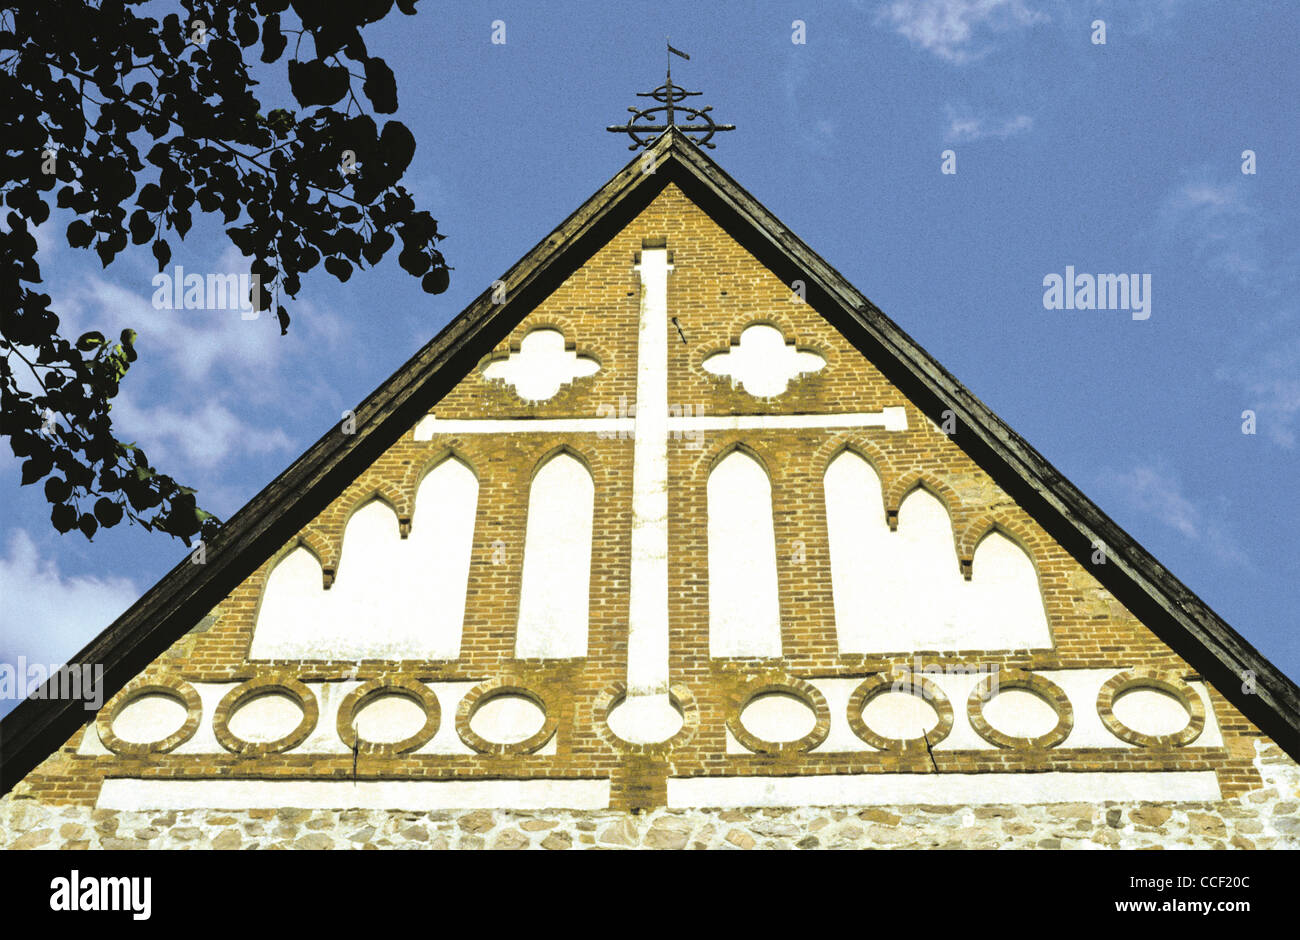 Architectural detail showing the roof peak of the 14th century medieval Saint Michael Church of Pernå, Finland Stock Photo